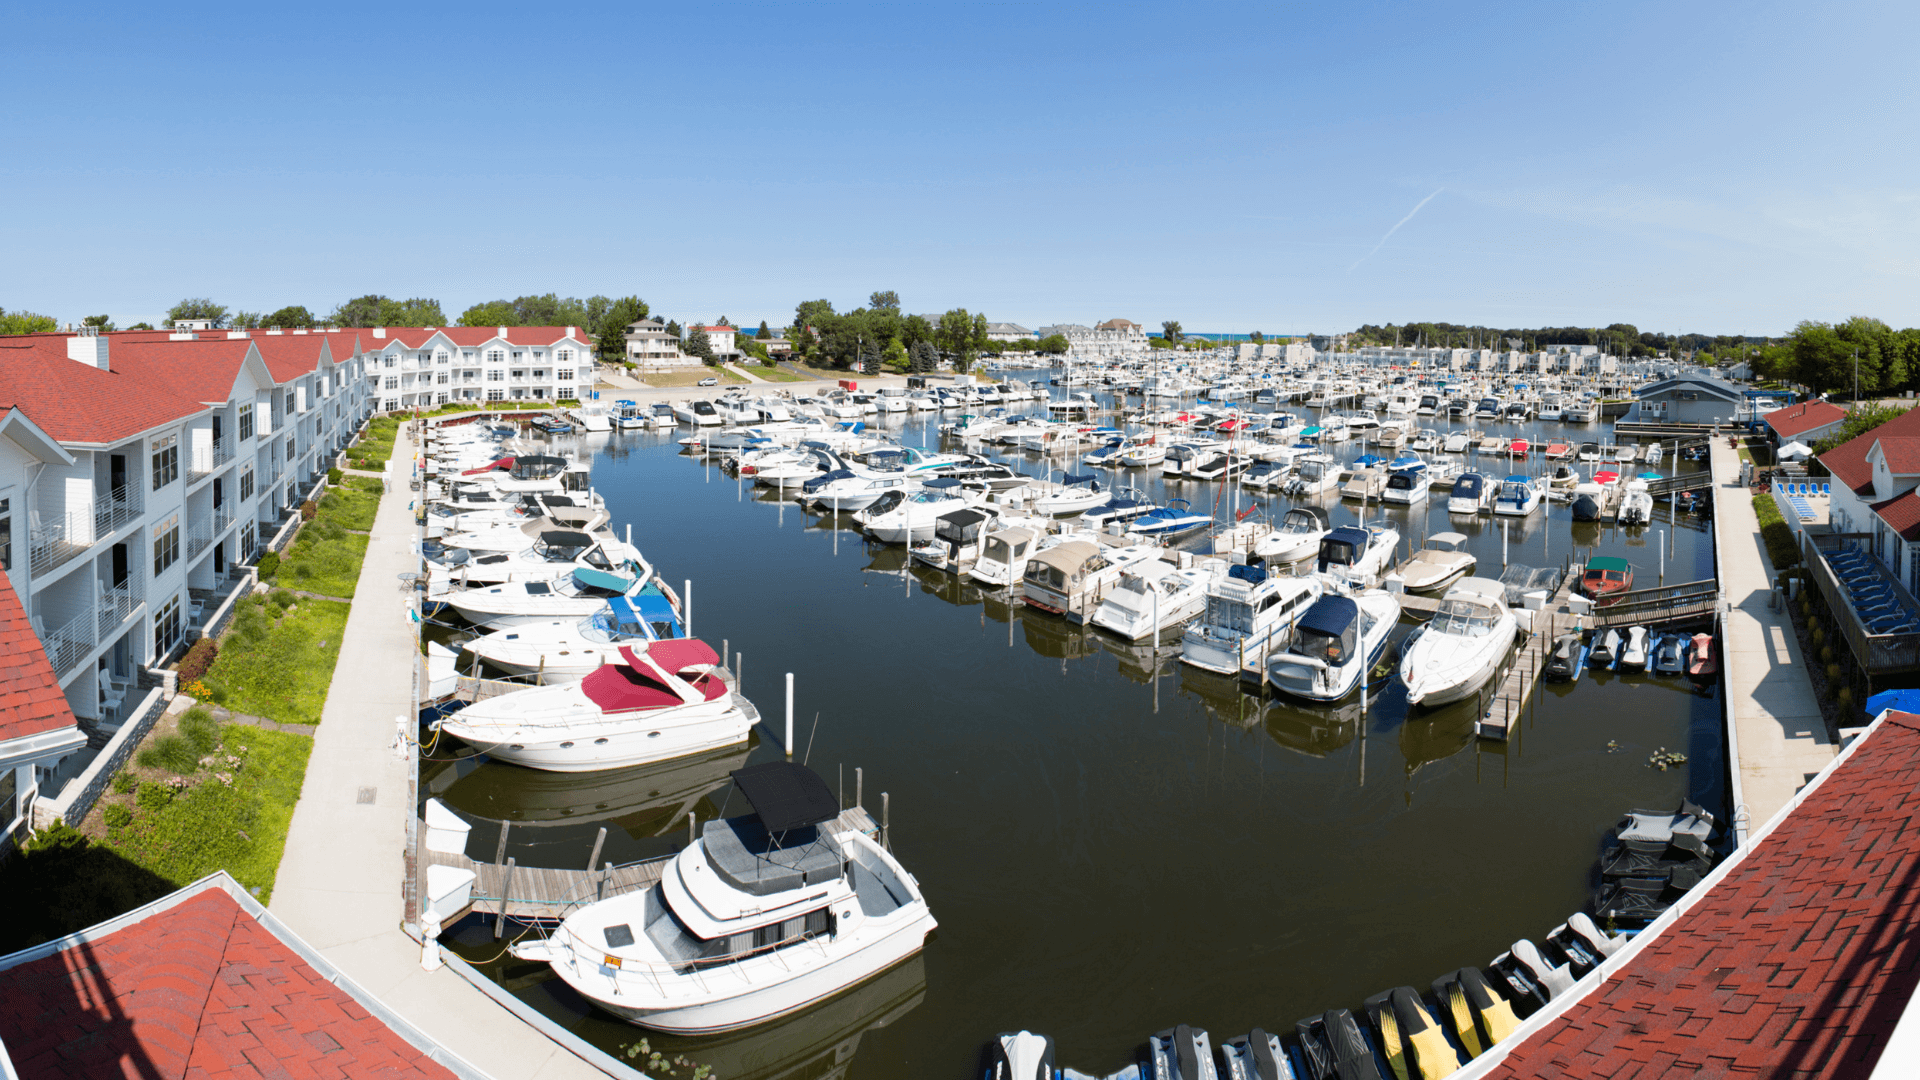 a view of a marina with many boats docked in it